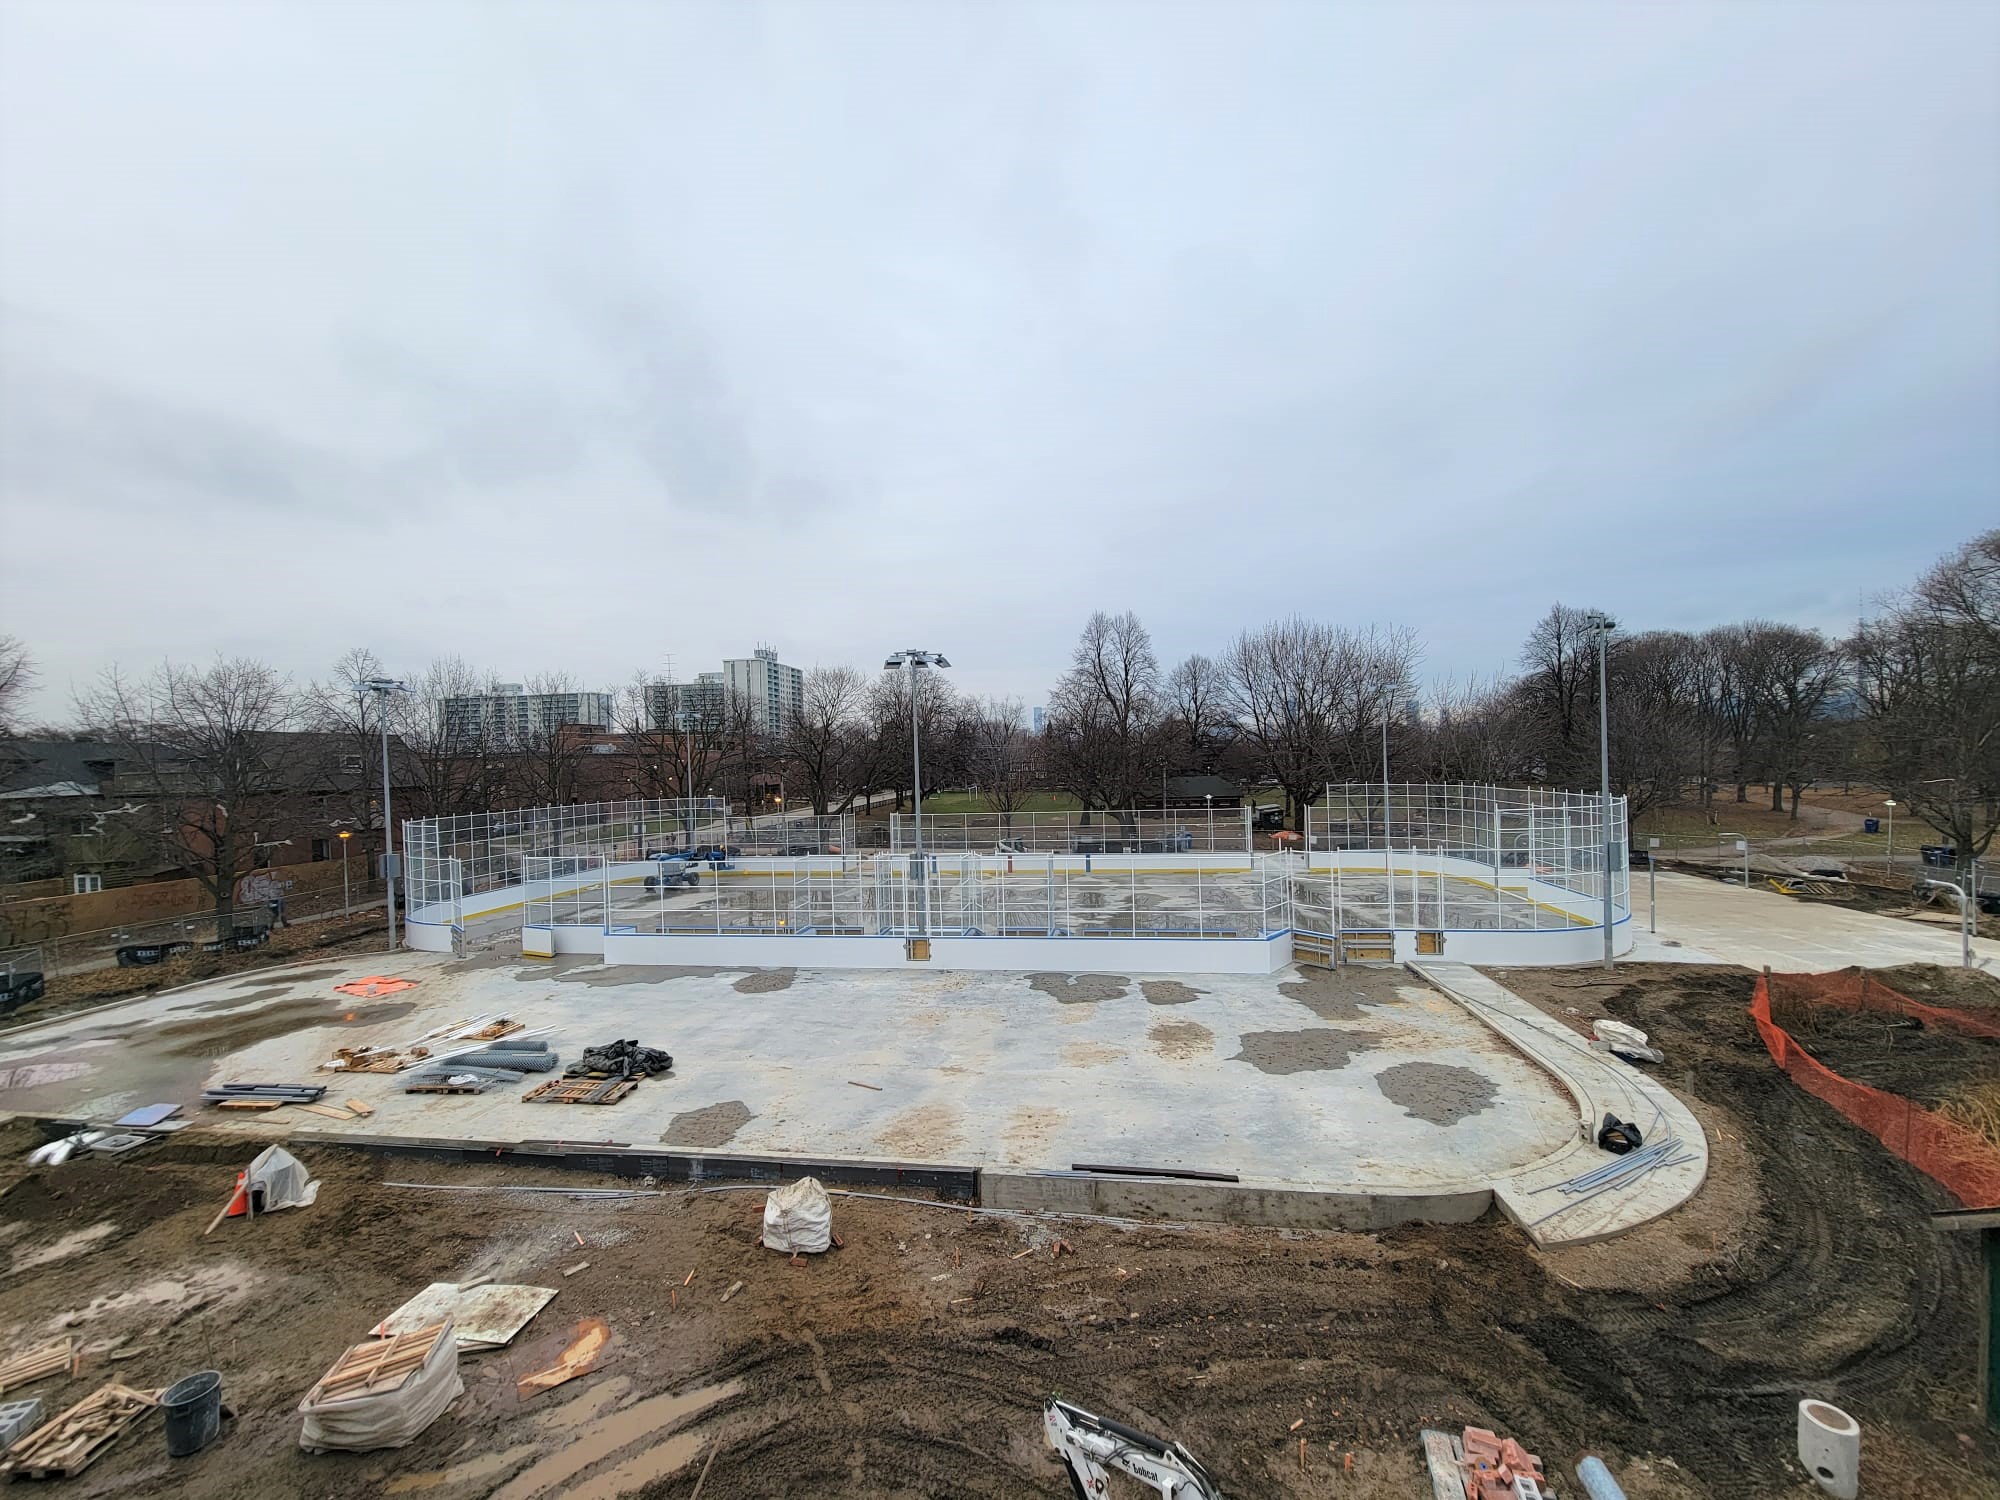 View of the hockey rink and leisure pad in Dufferin Grove Park taken from the roof of the Clubhouse looking east. It shows a construction site, with materials, new concrete and dirt. 